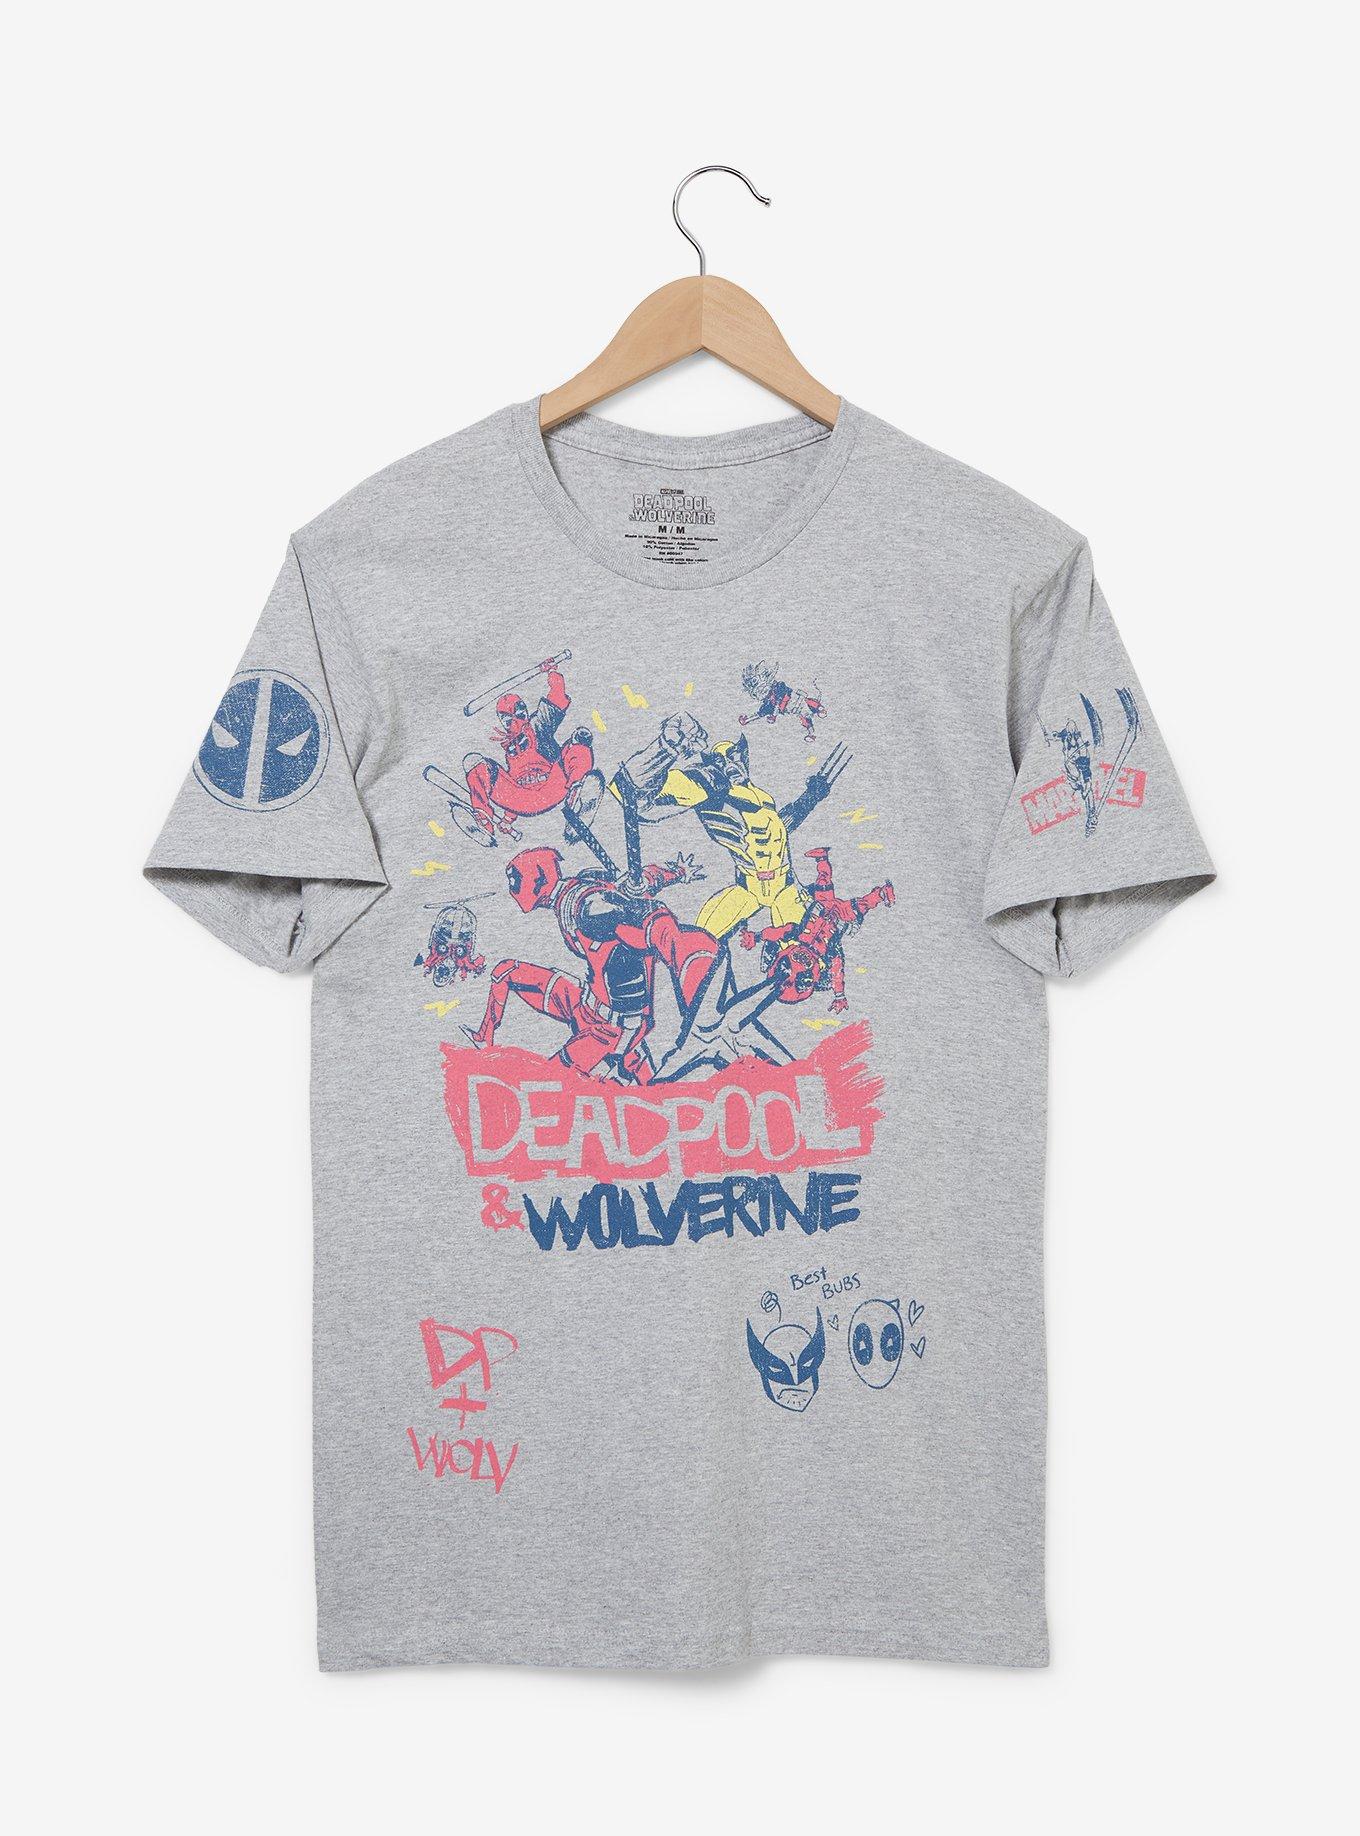 Marvel Deadpool & Wolverine Doodle Icons T-Shirt - BoxLunch Exclusive, , hi-res